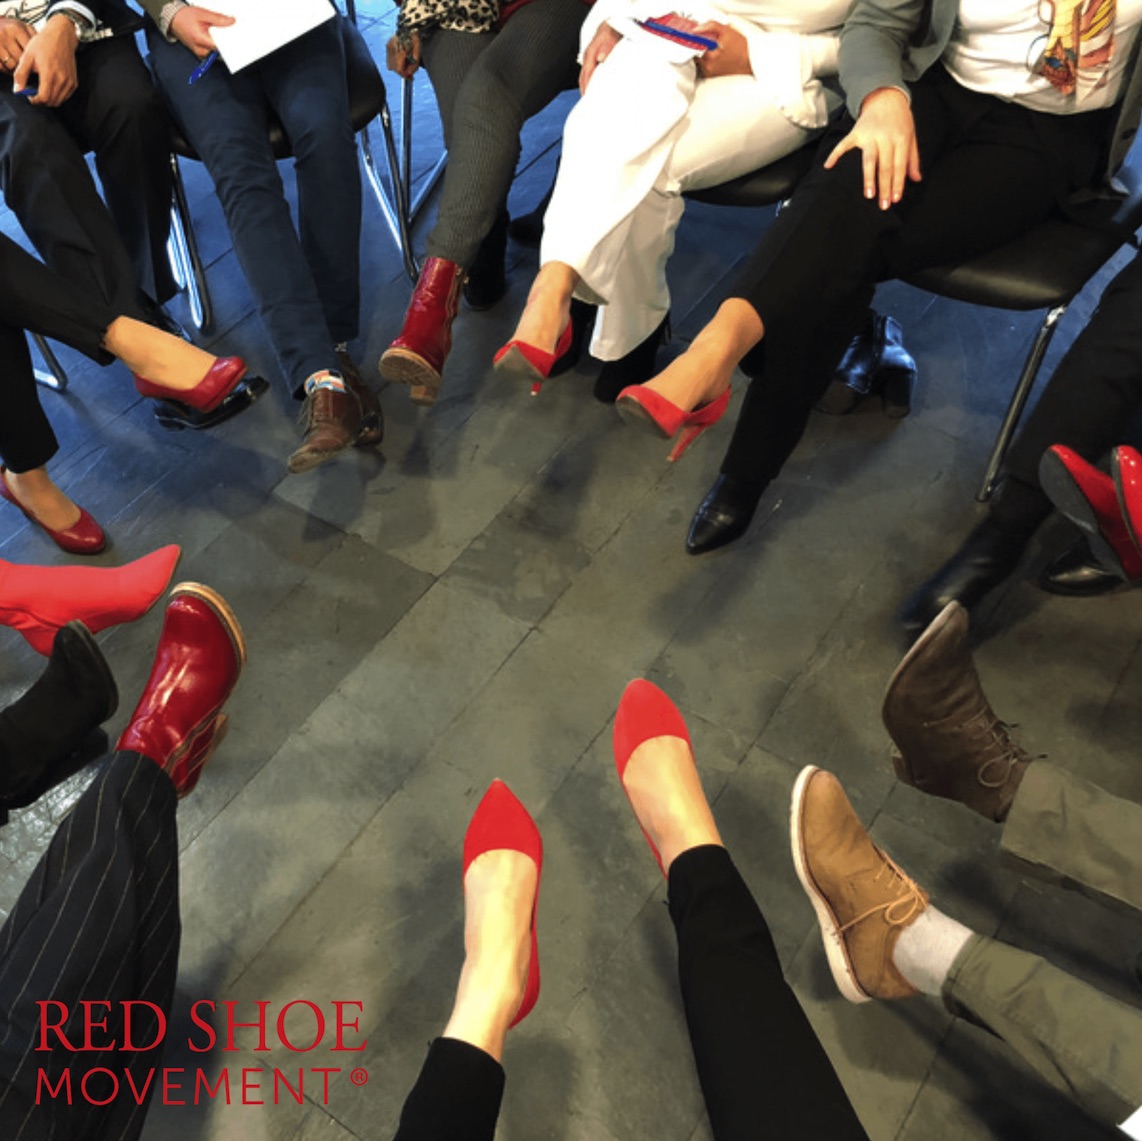 The RSM Circles are one of the effective solutions to promote gender equality in your workplace.